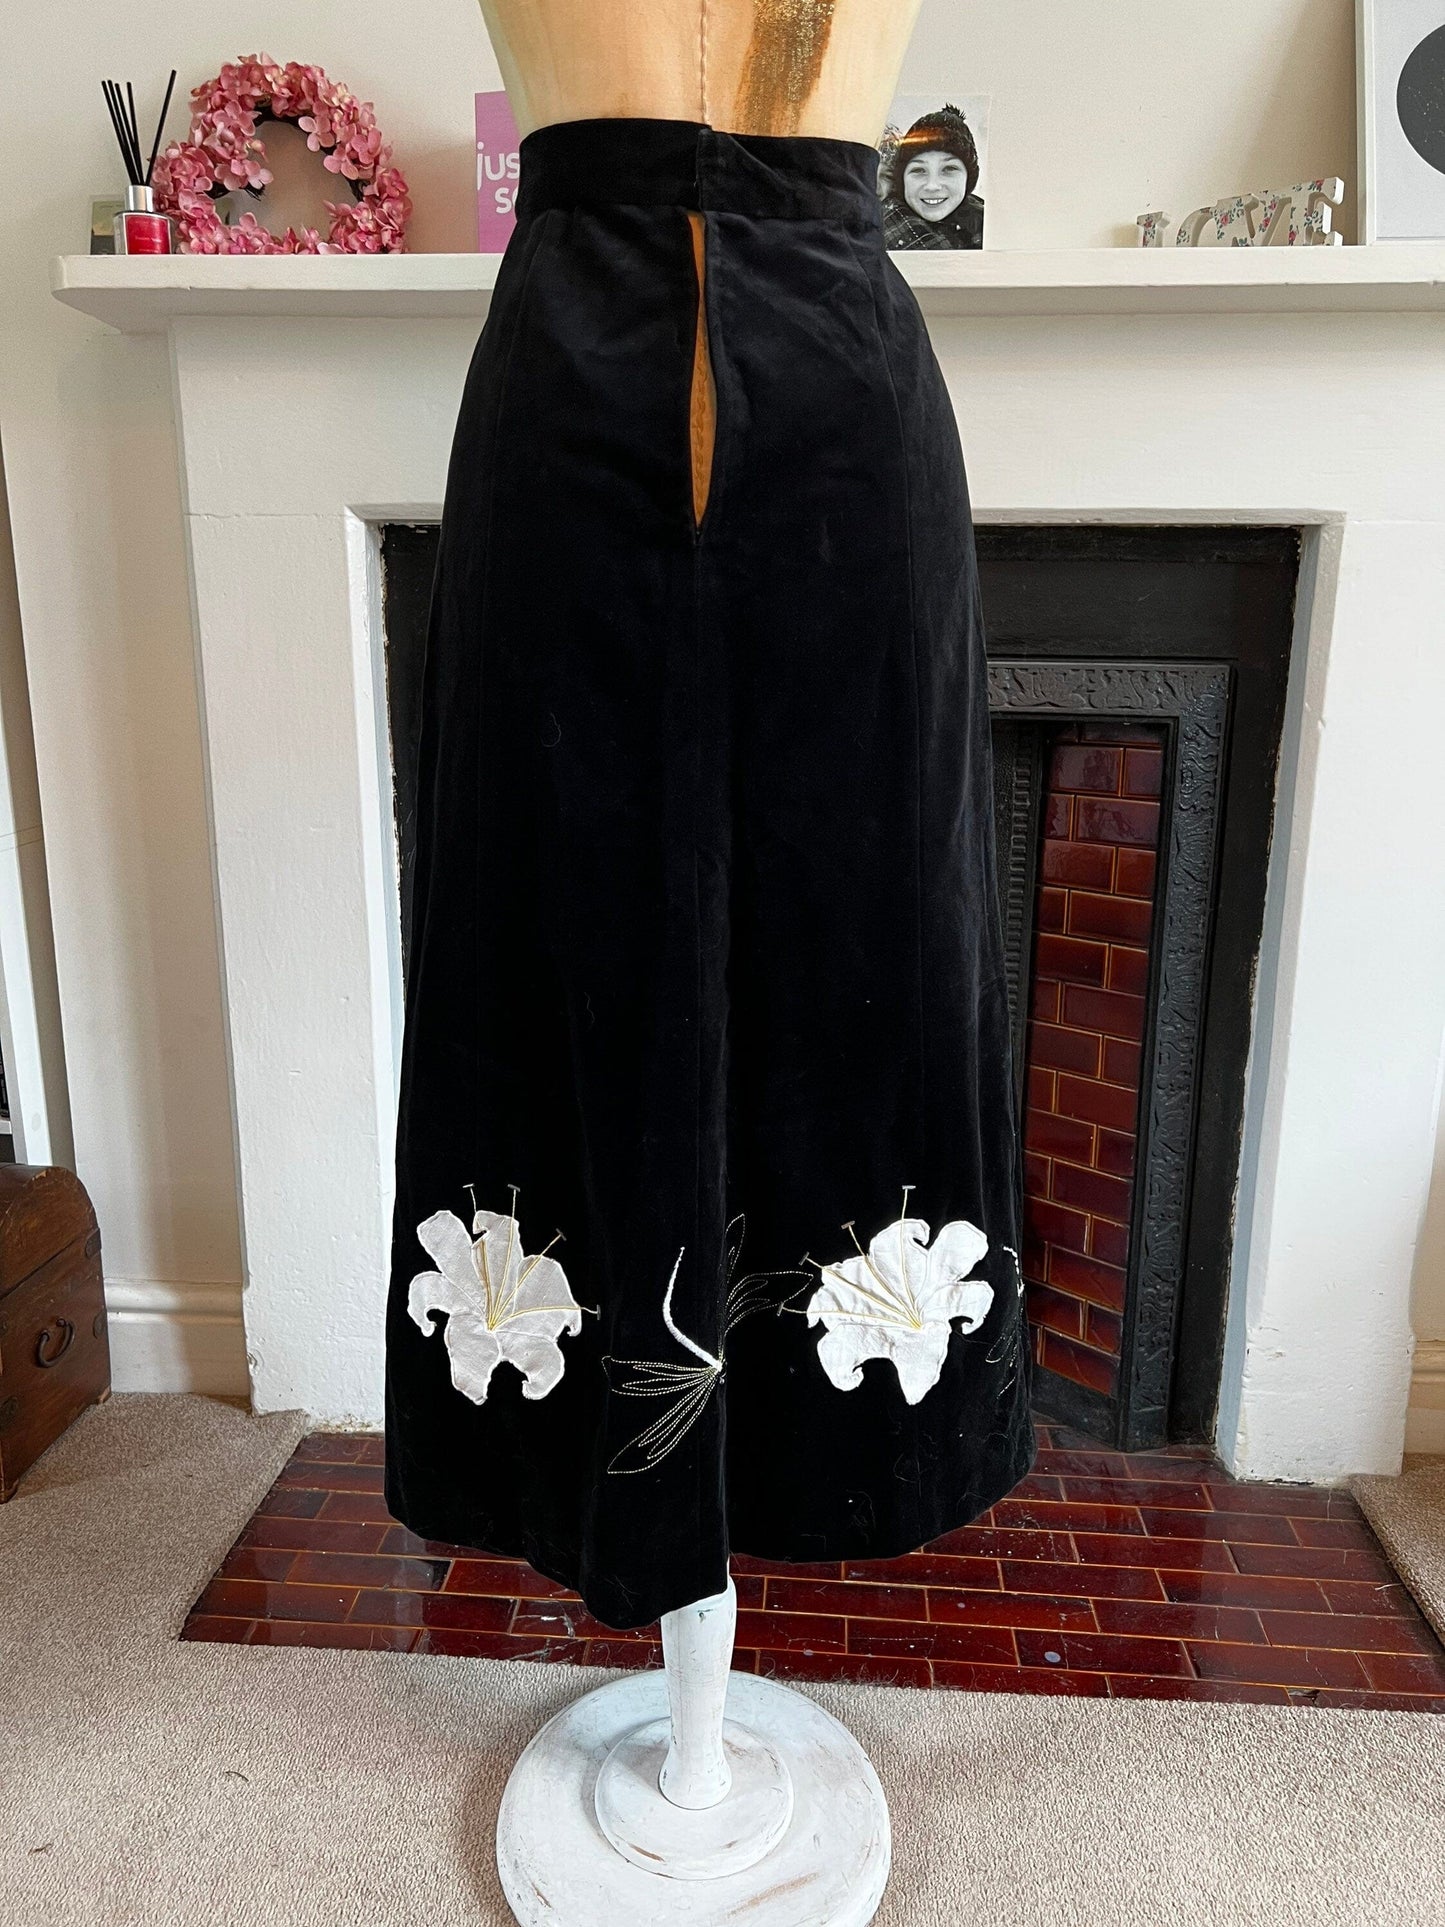 Vintage Velvet Skirt Midi Length Black With Lillies and Dragonfly patterns  UK Size 8 - Needs New Zip